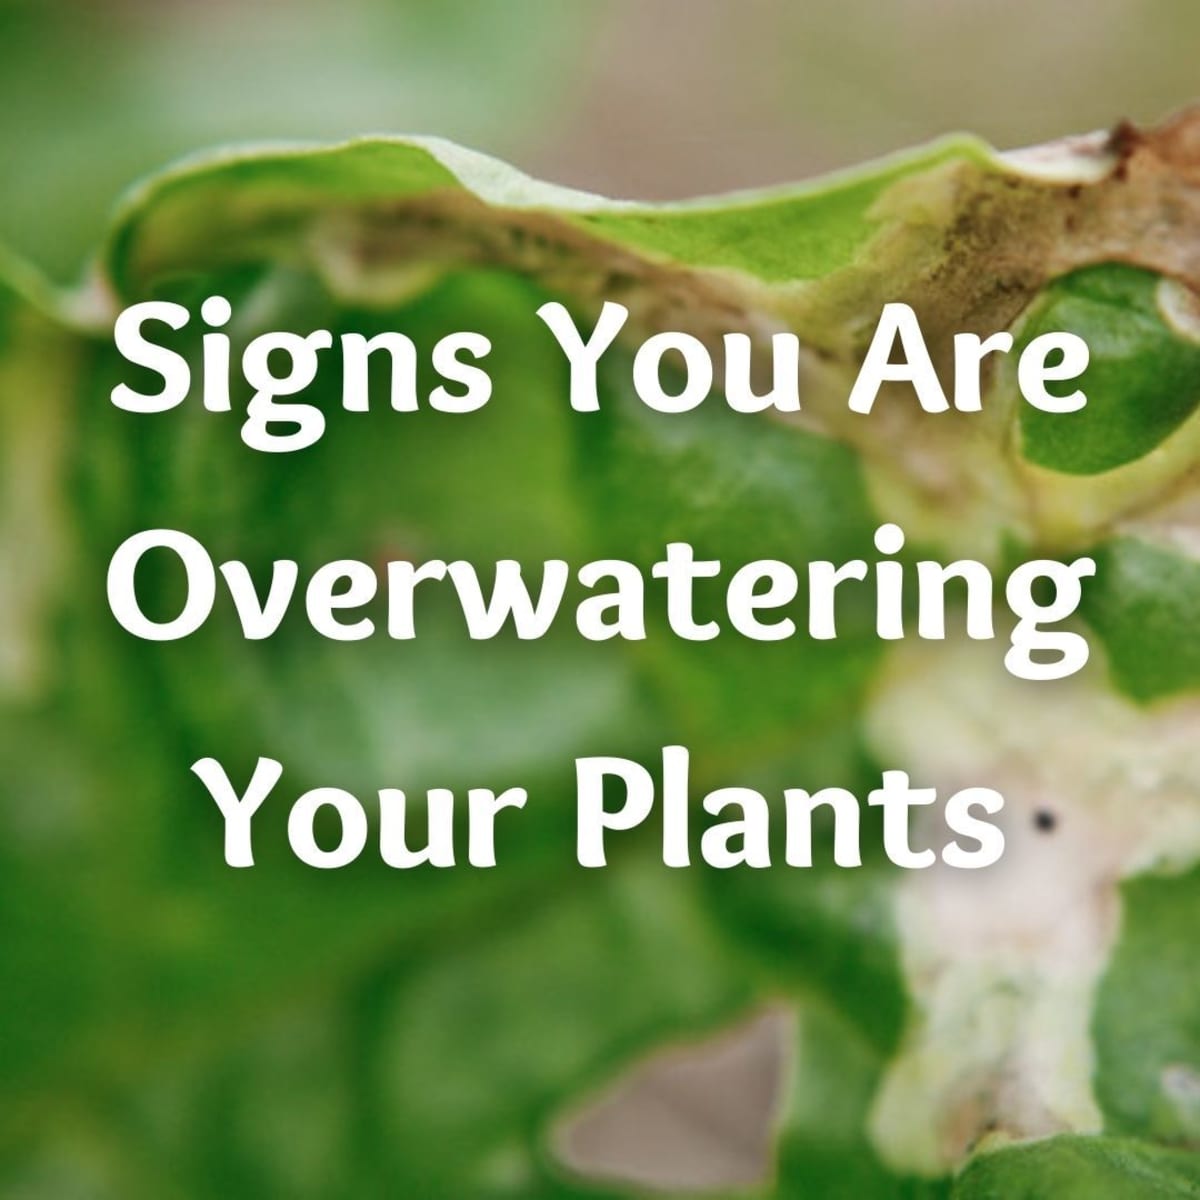 Brown and Crunchy Leaf & Other Signs Overwatering - Dengarden